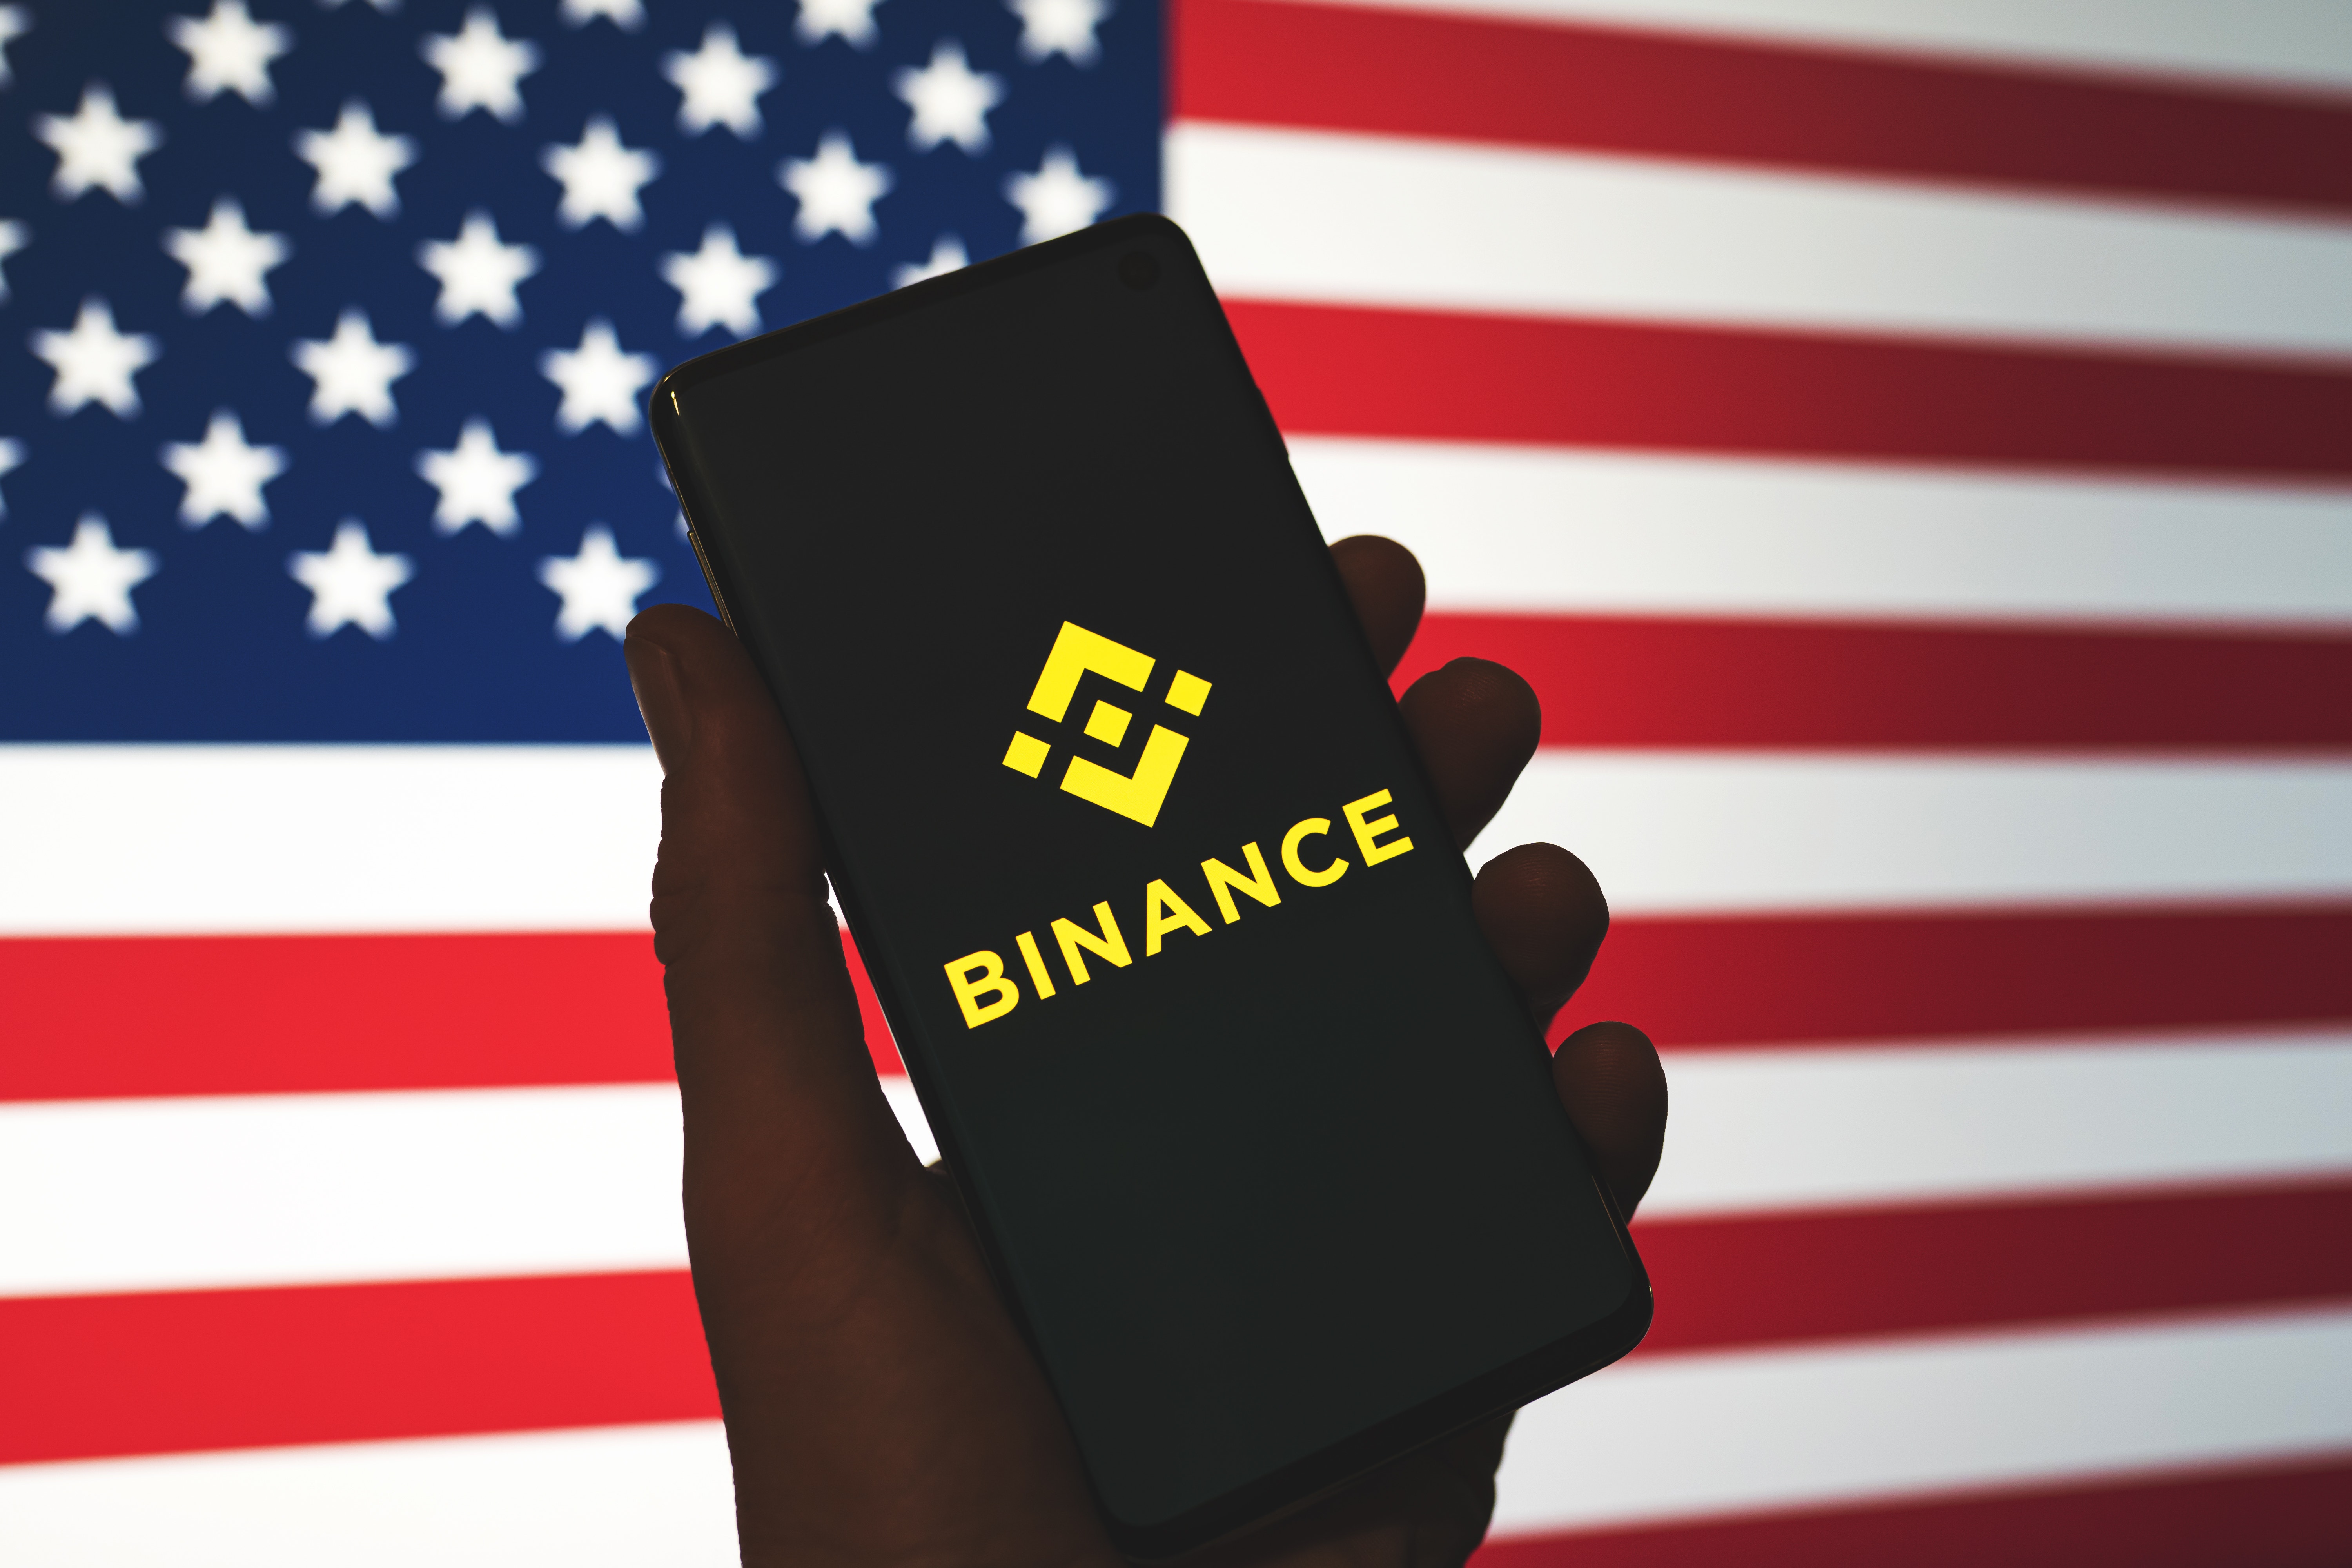 Binance US Launches Ethereum (ETH) Staking With 6% APY Ahead Of Merge